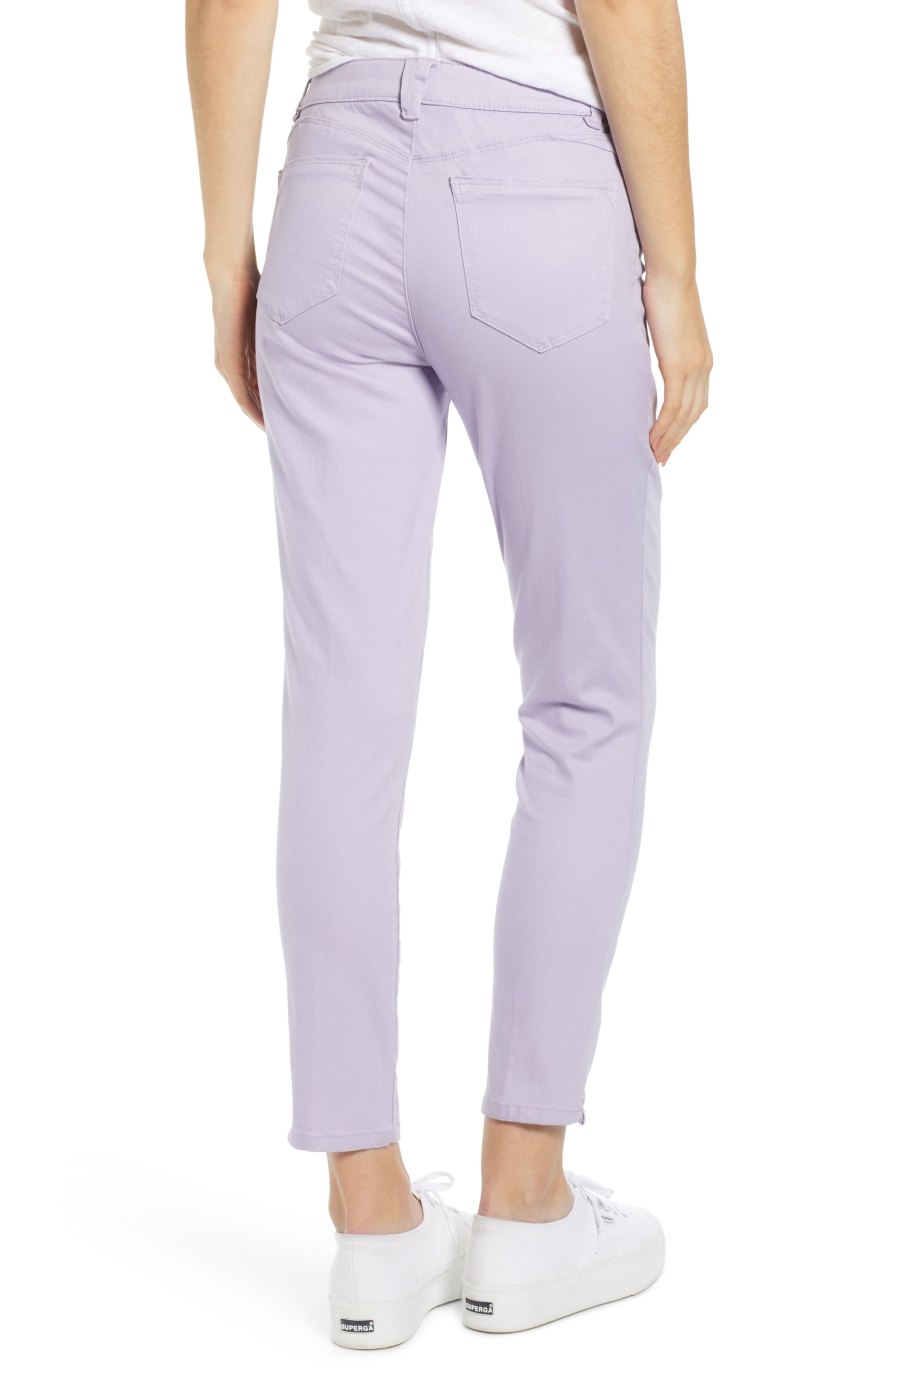 Wit & Wisdom Skinnies Are Now Available in Fun Springtime Pastels